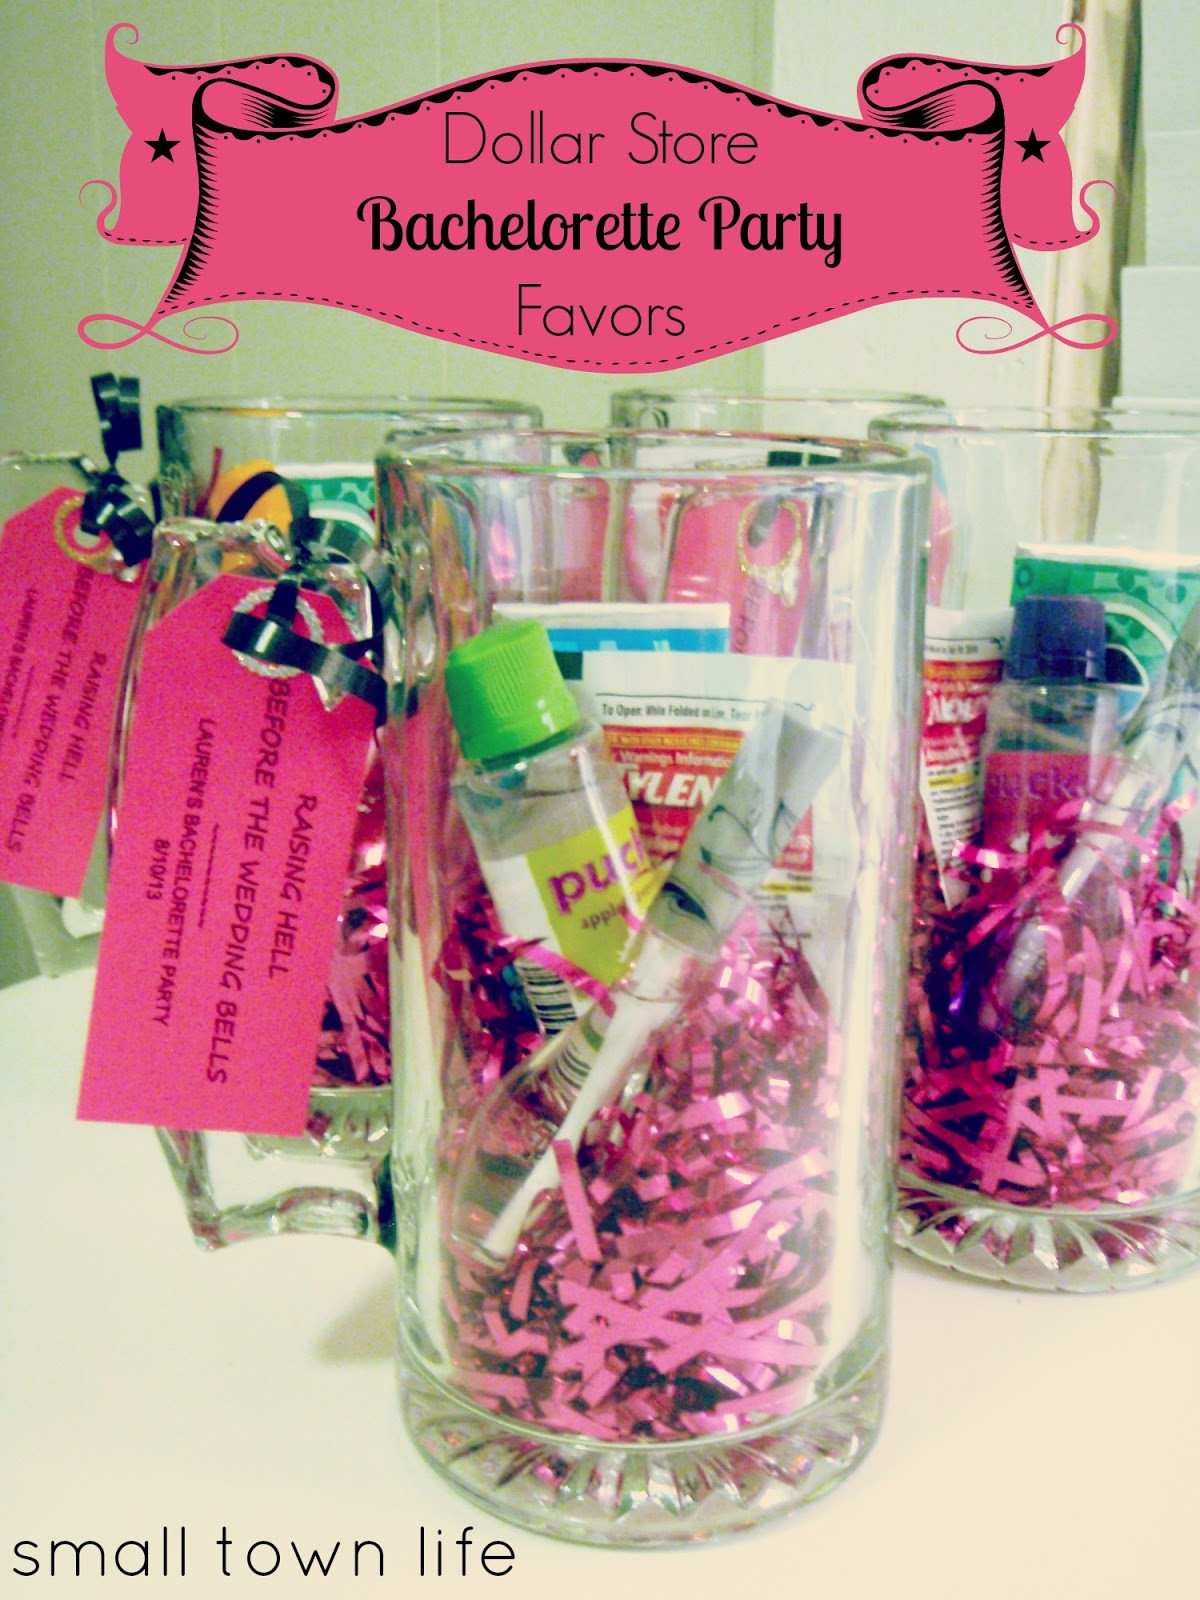 Small Bachelorette Party Ideas
 Small Town Life Dollar Store Bachelorette Party Favors